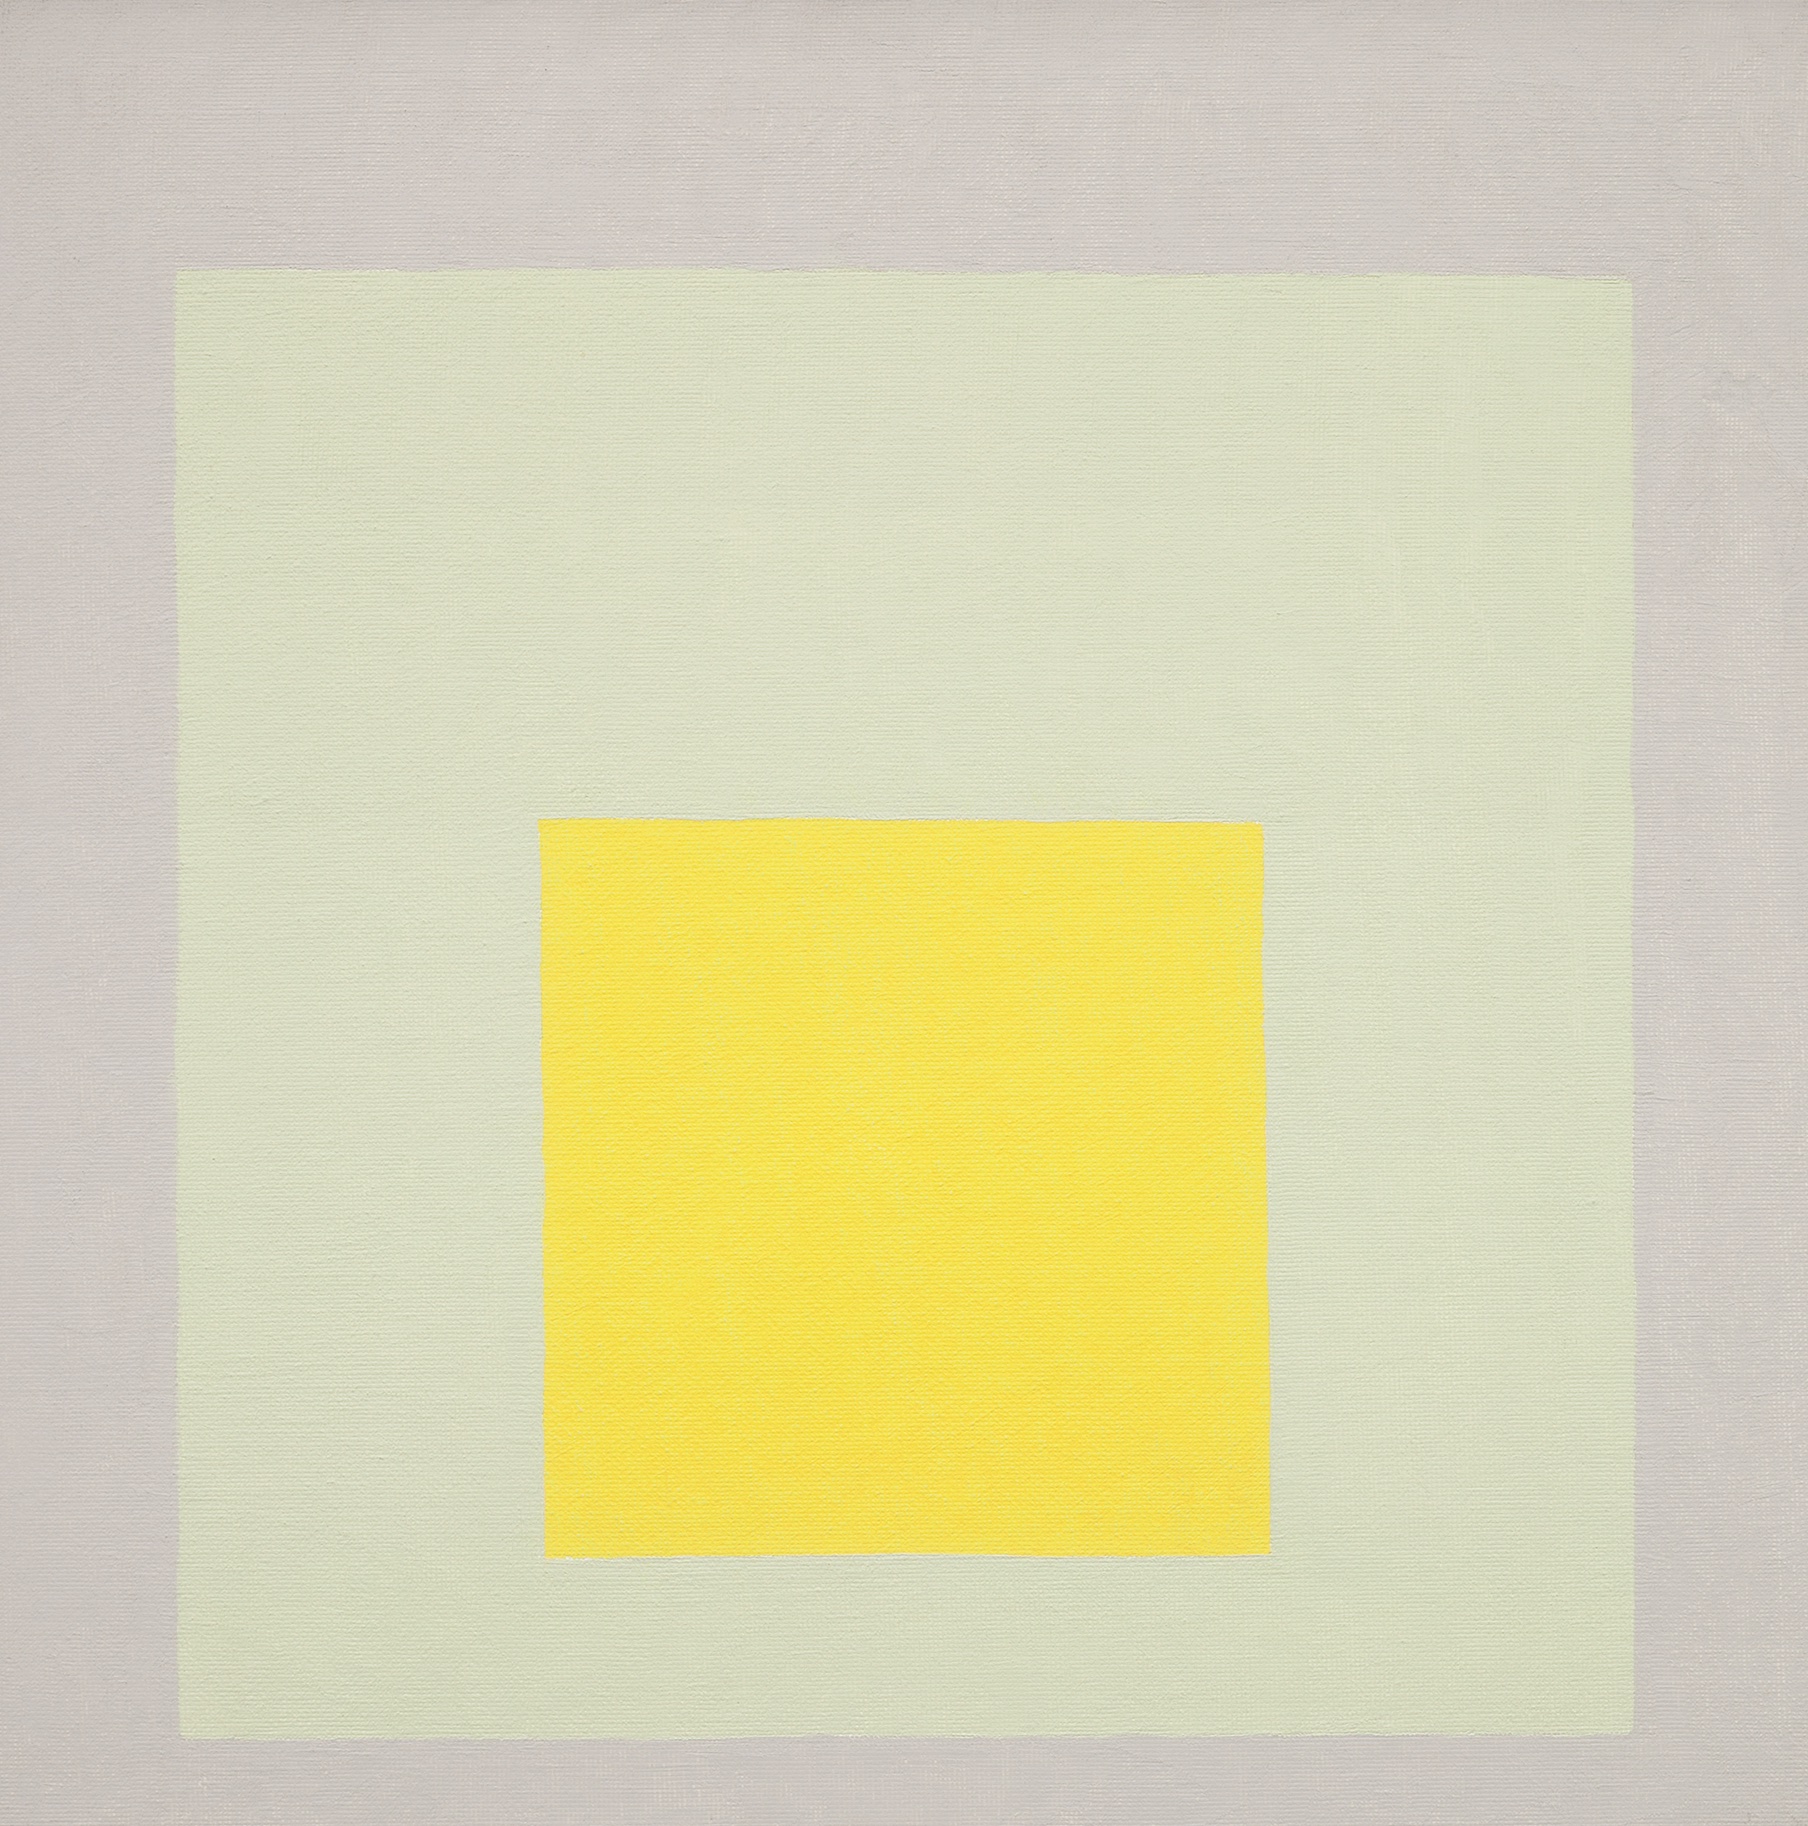 Study for Homage to the Square: Impact, 1965. Oil on Masonite, by Josef Albers